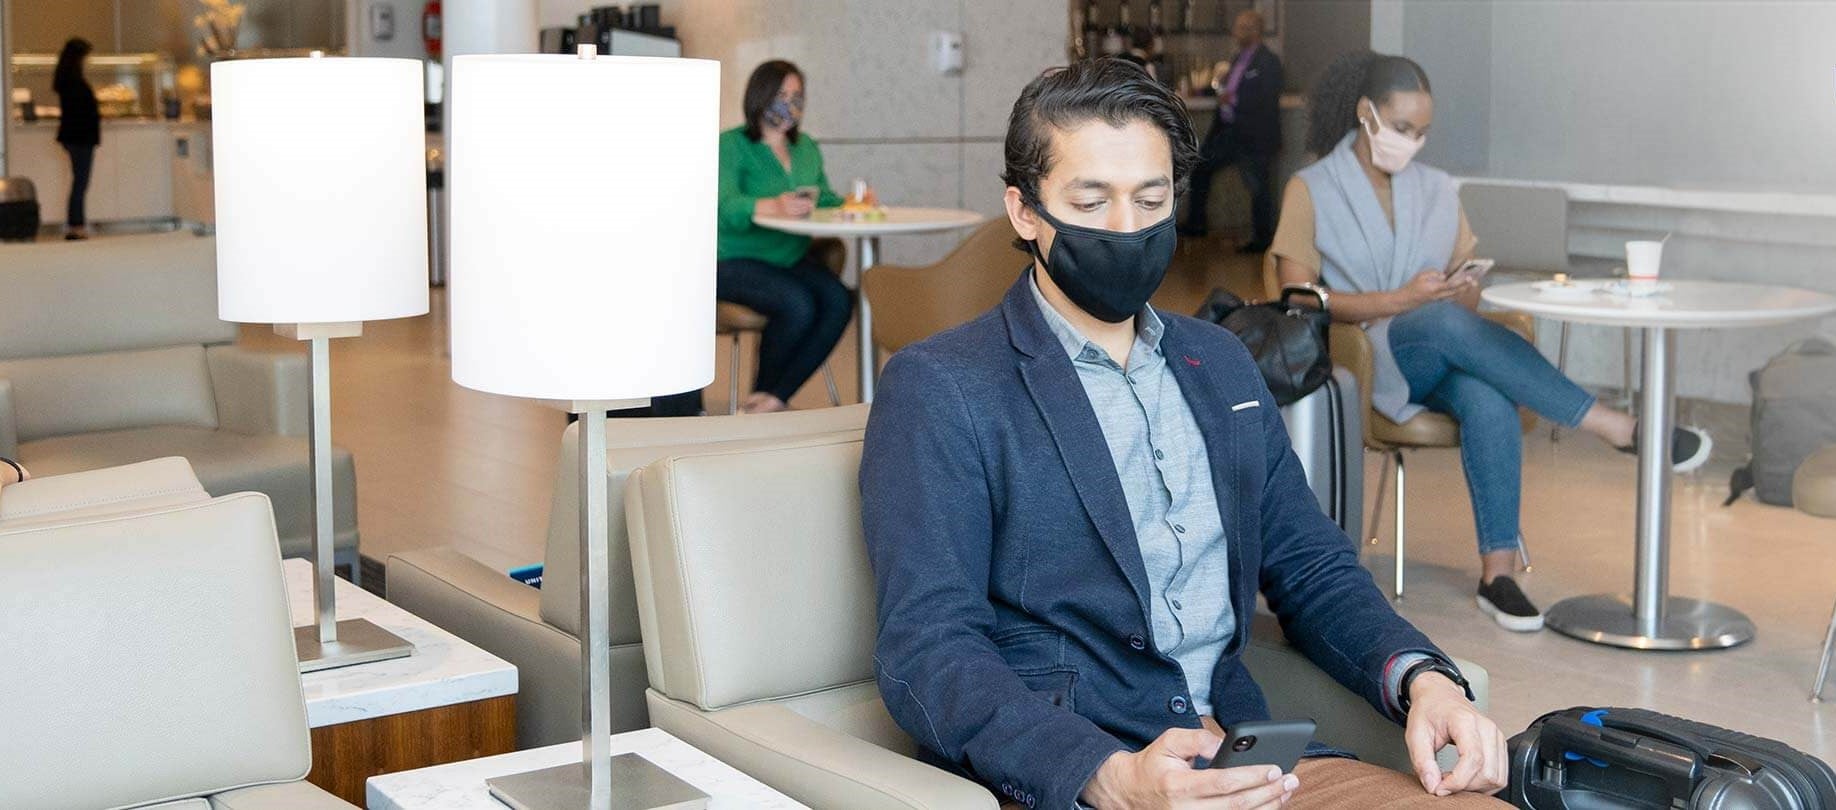 United Club guests with masks